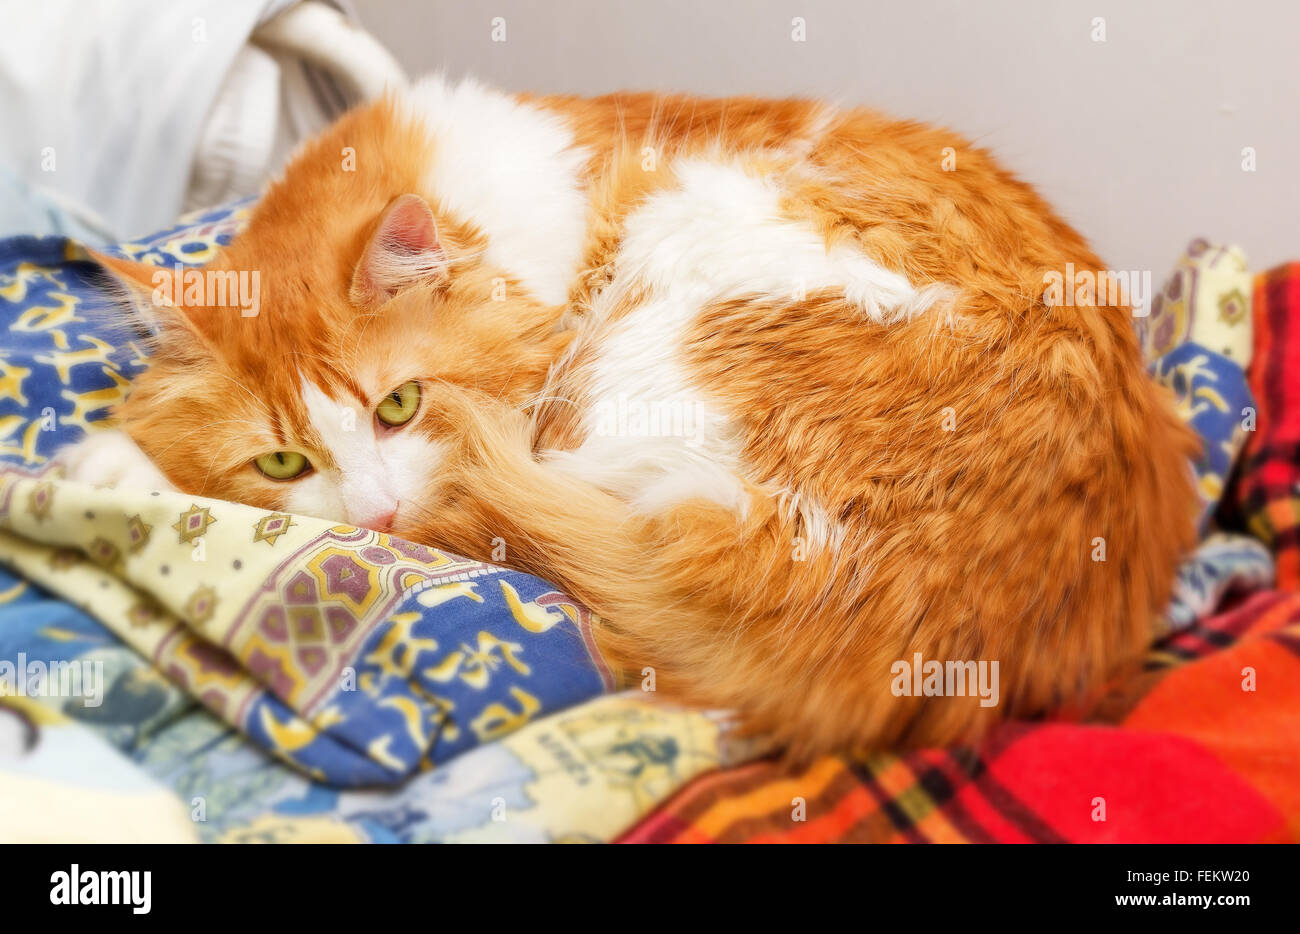 Big nice ginger cat lying on bed linen Stock Photo